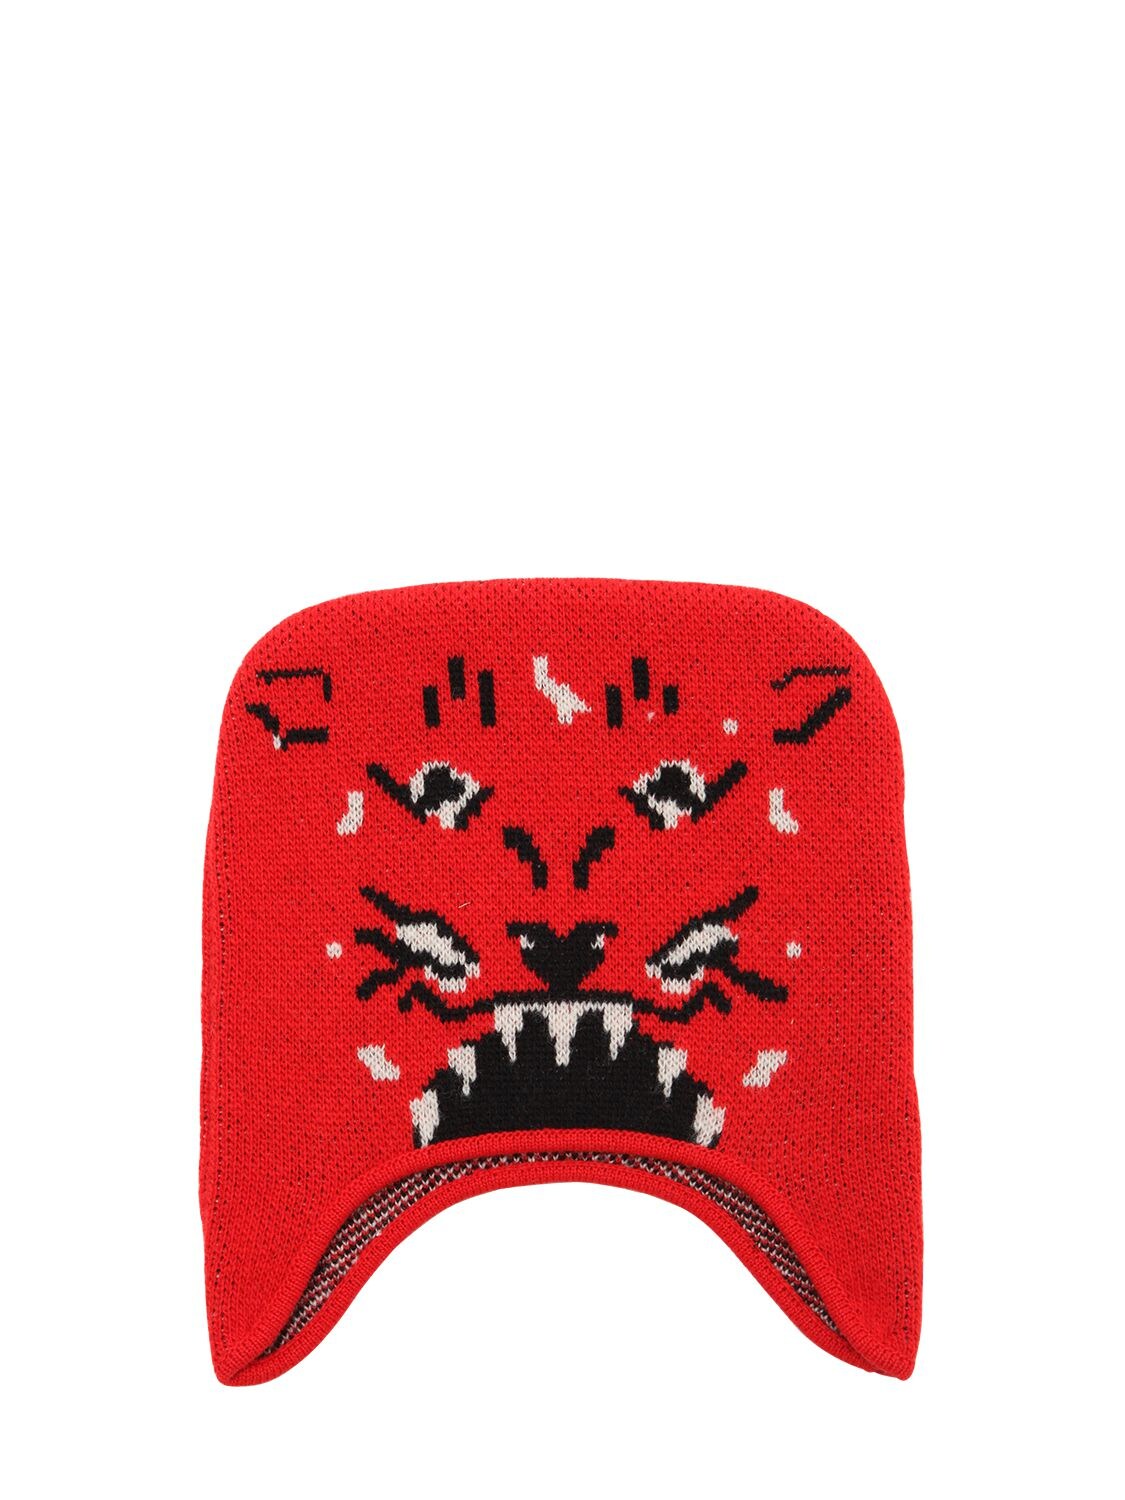 Gucci Babies' Tiger Intarsia Wool Knit Hat In Red